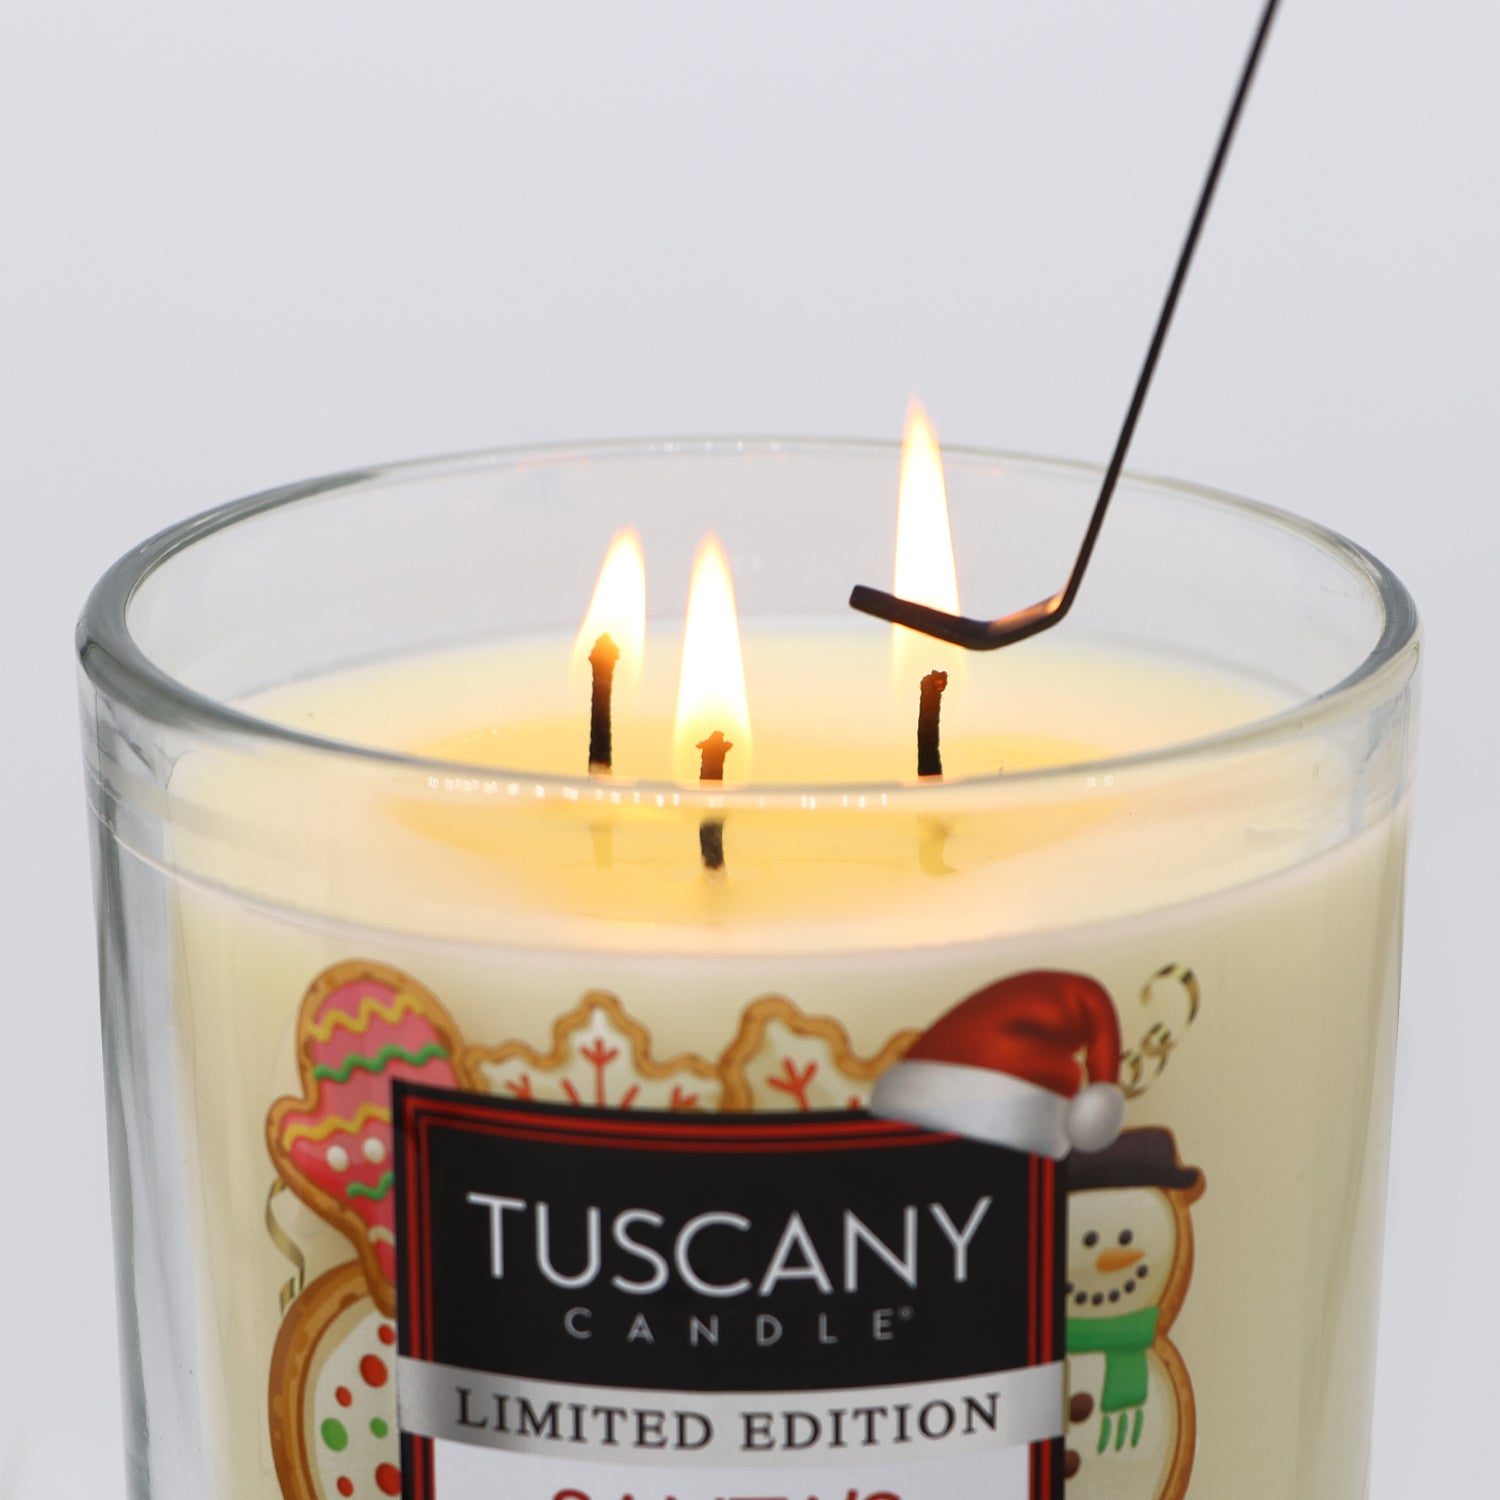 Tuscany Candle - Limited Edition 3-Piece Candle Care Set with stainless steel accents.